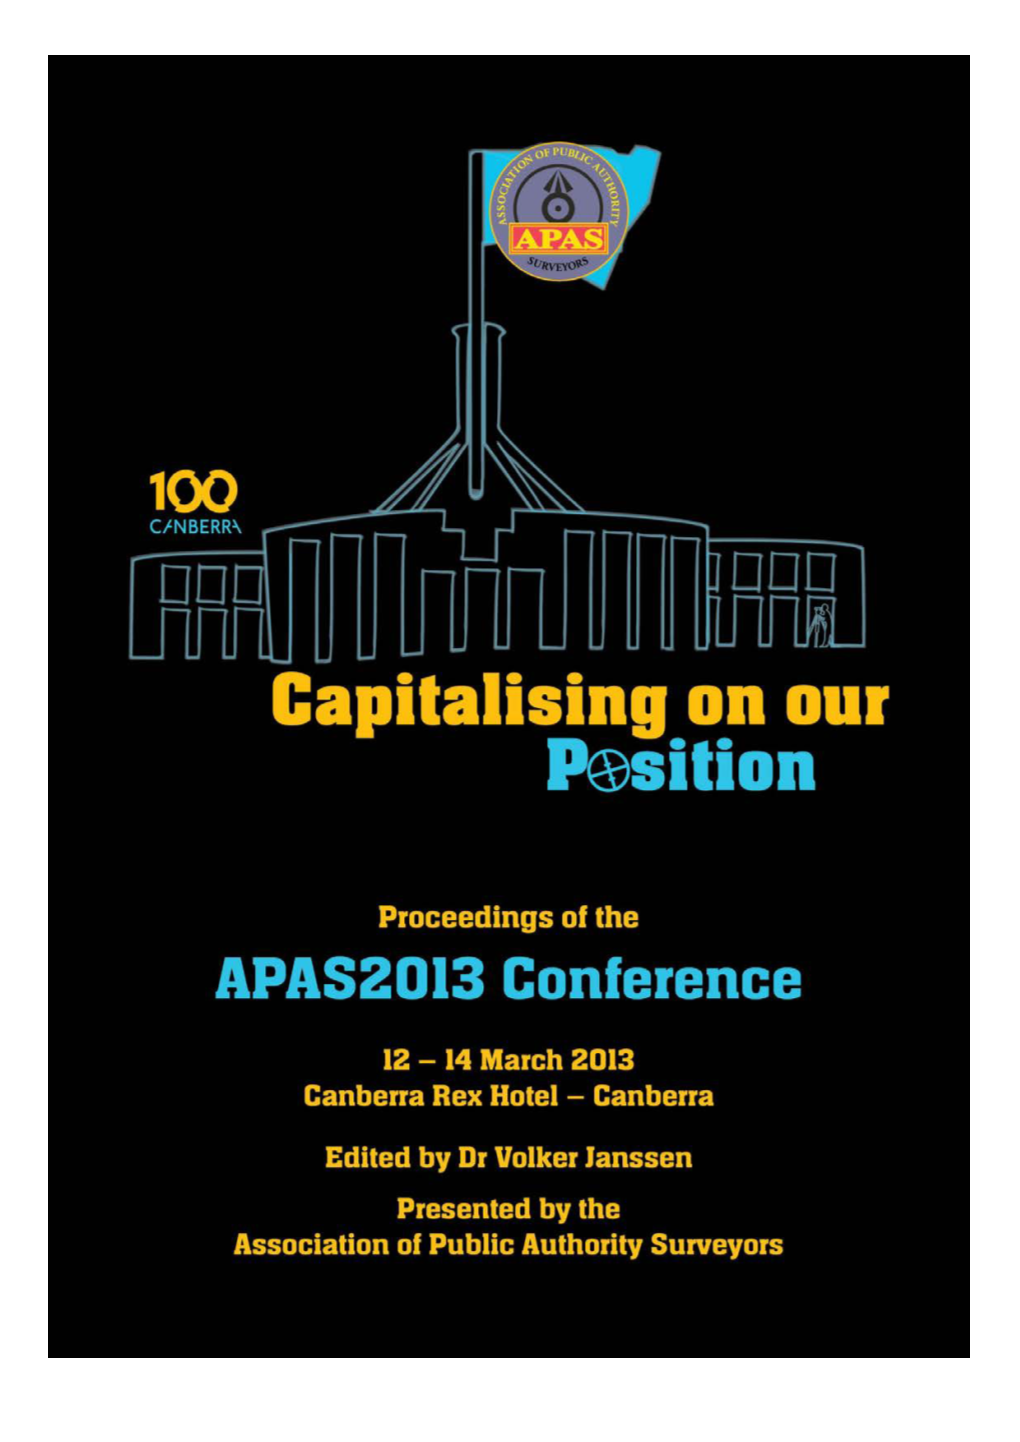 Proceedings of the 18Th Association of Public Authority Surveyors Conference (APAS2013) Canberra, Australian Capital Territory, Australia, 12-14 March 2013